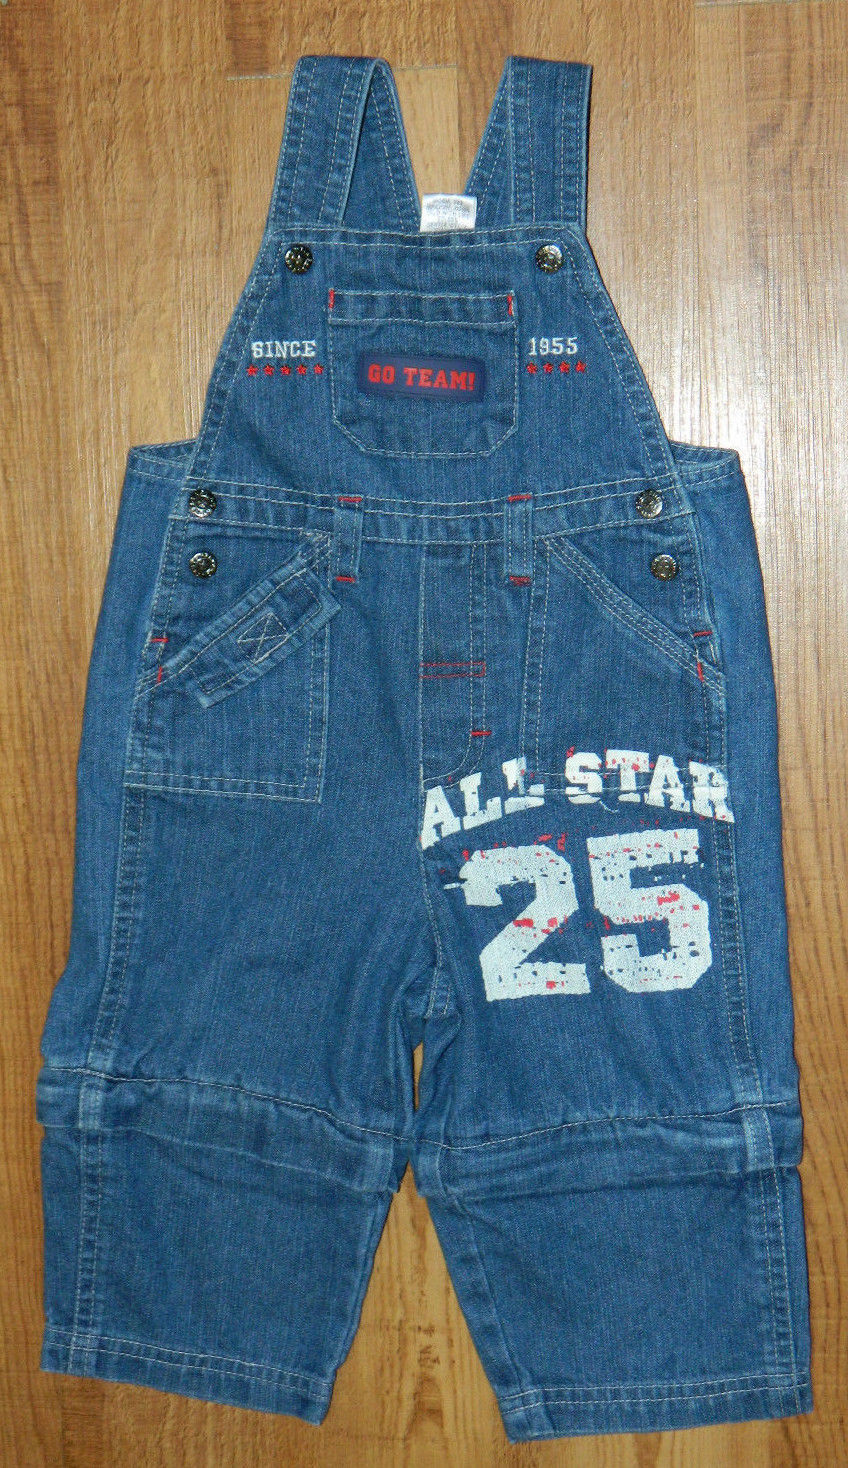 Primary image for Infants Boys Starting Out Brand Denim Overalls and Shorts size 12 months / 20x9